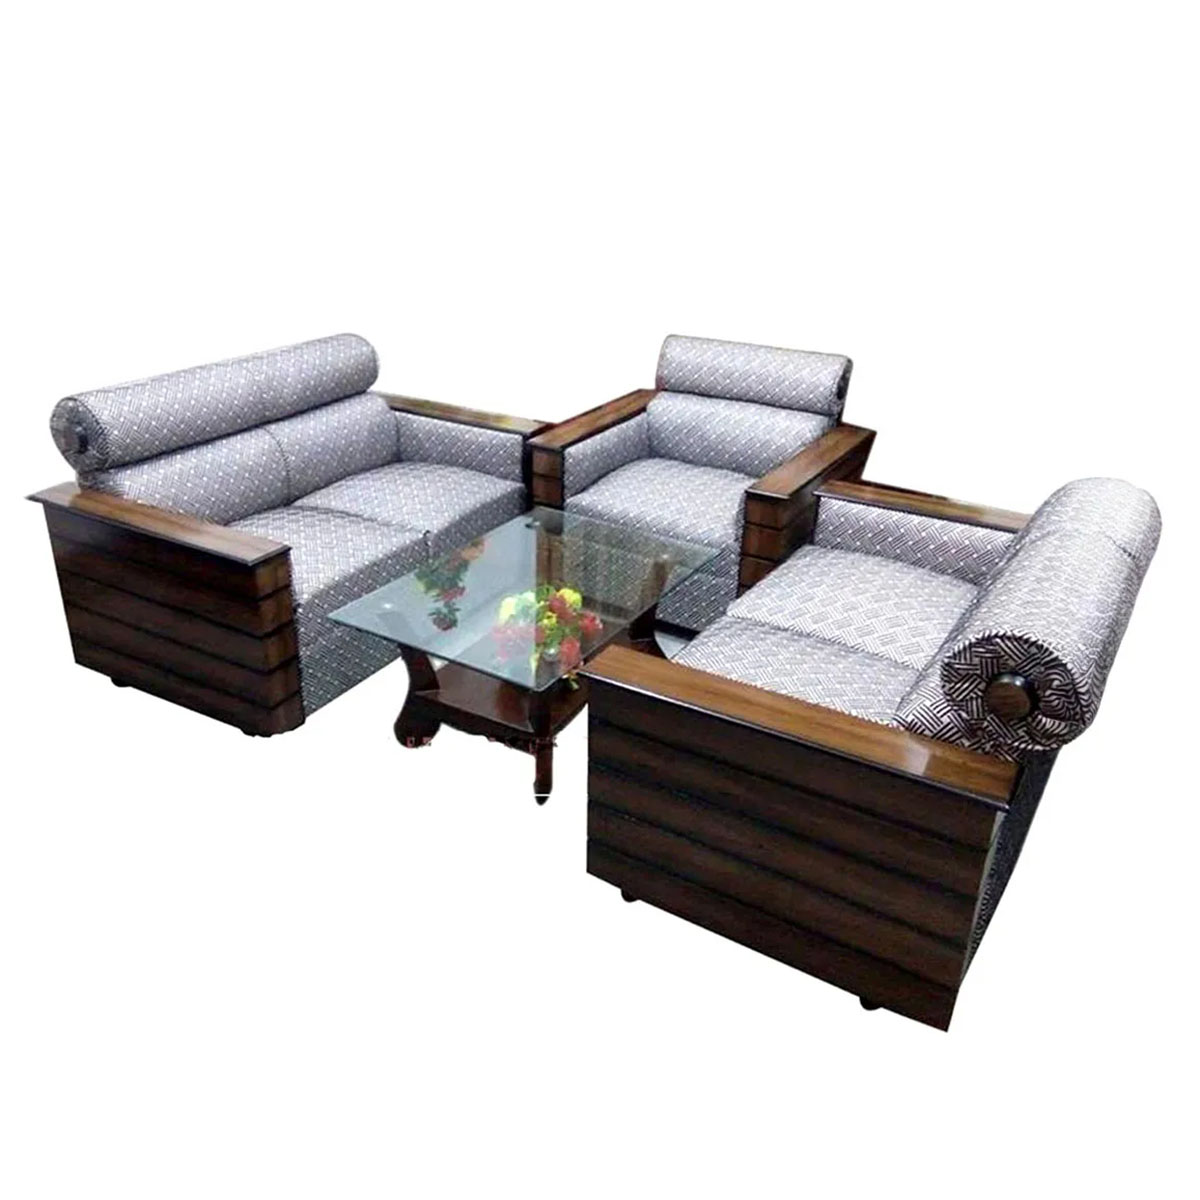 Malaysian Process Wood 5 Seated Sofa Without Table